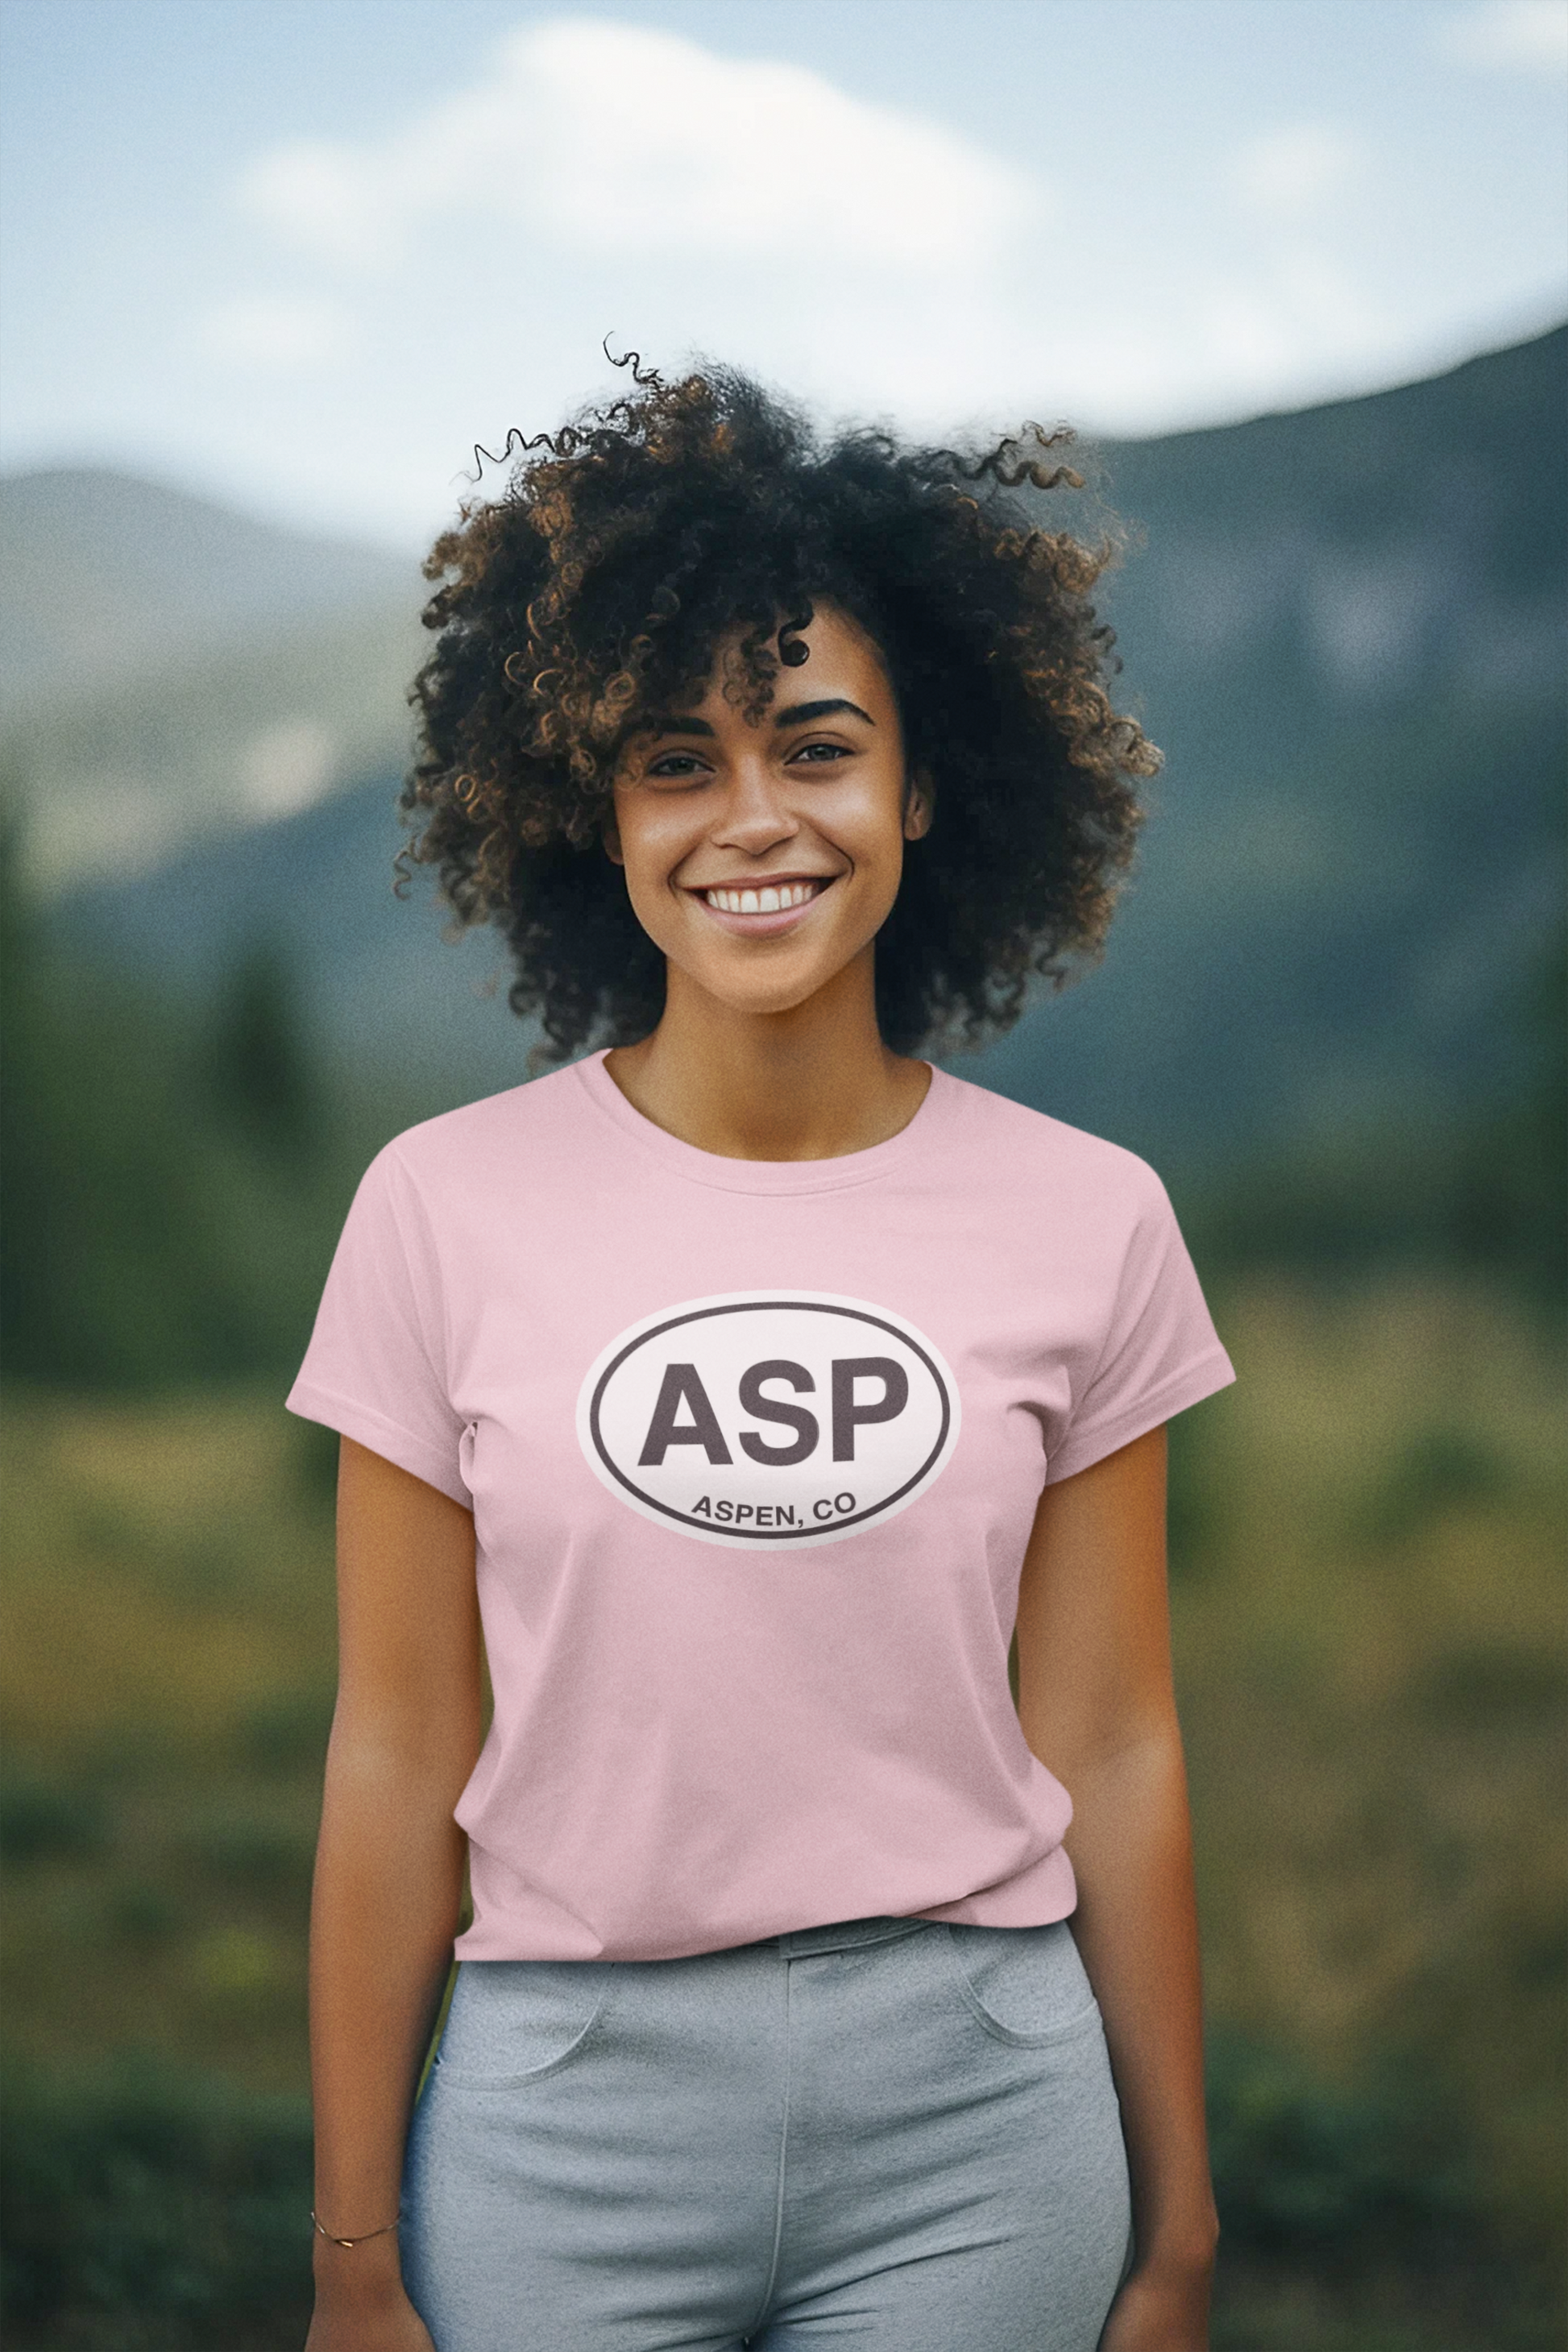 Women's T-Shirt with Aspen oval logo on front